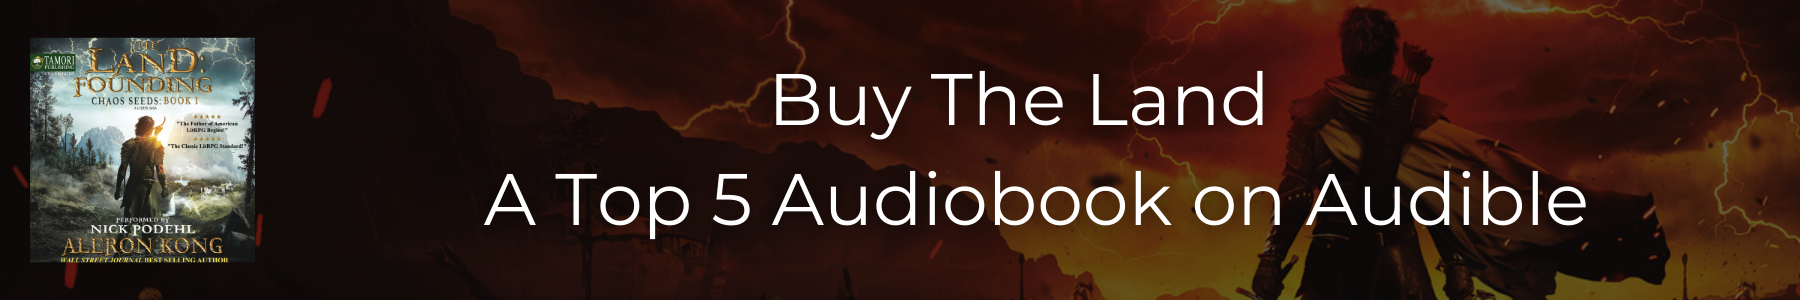 Copy of Copy of Buy a Top 5 Audiobook on Audible-3.png